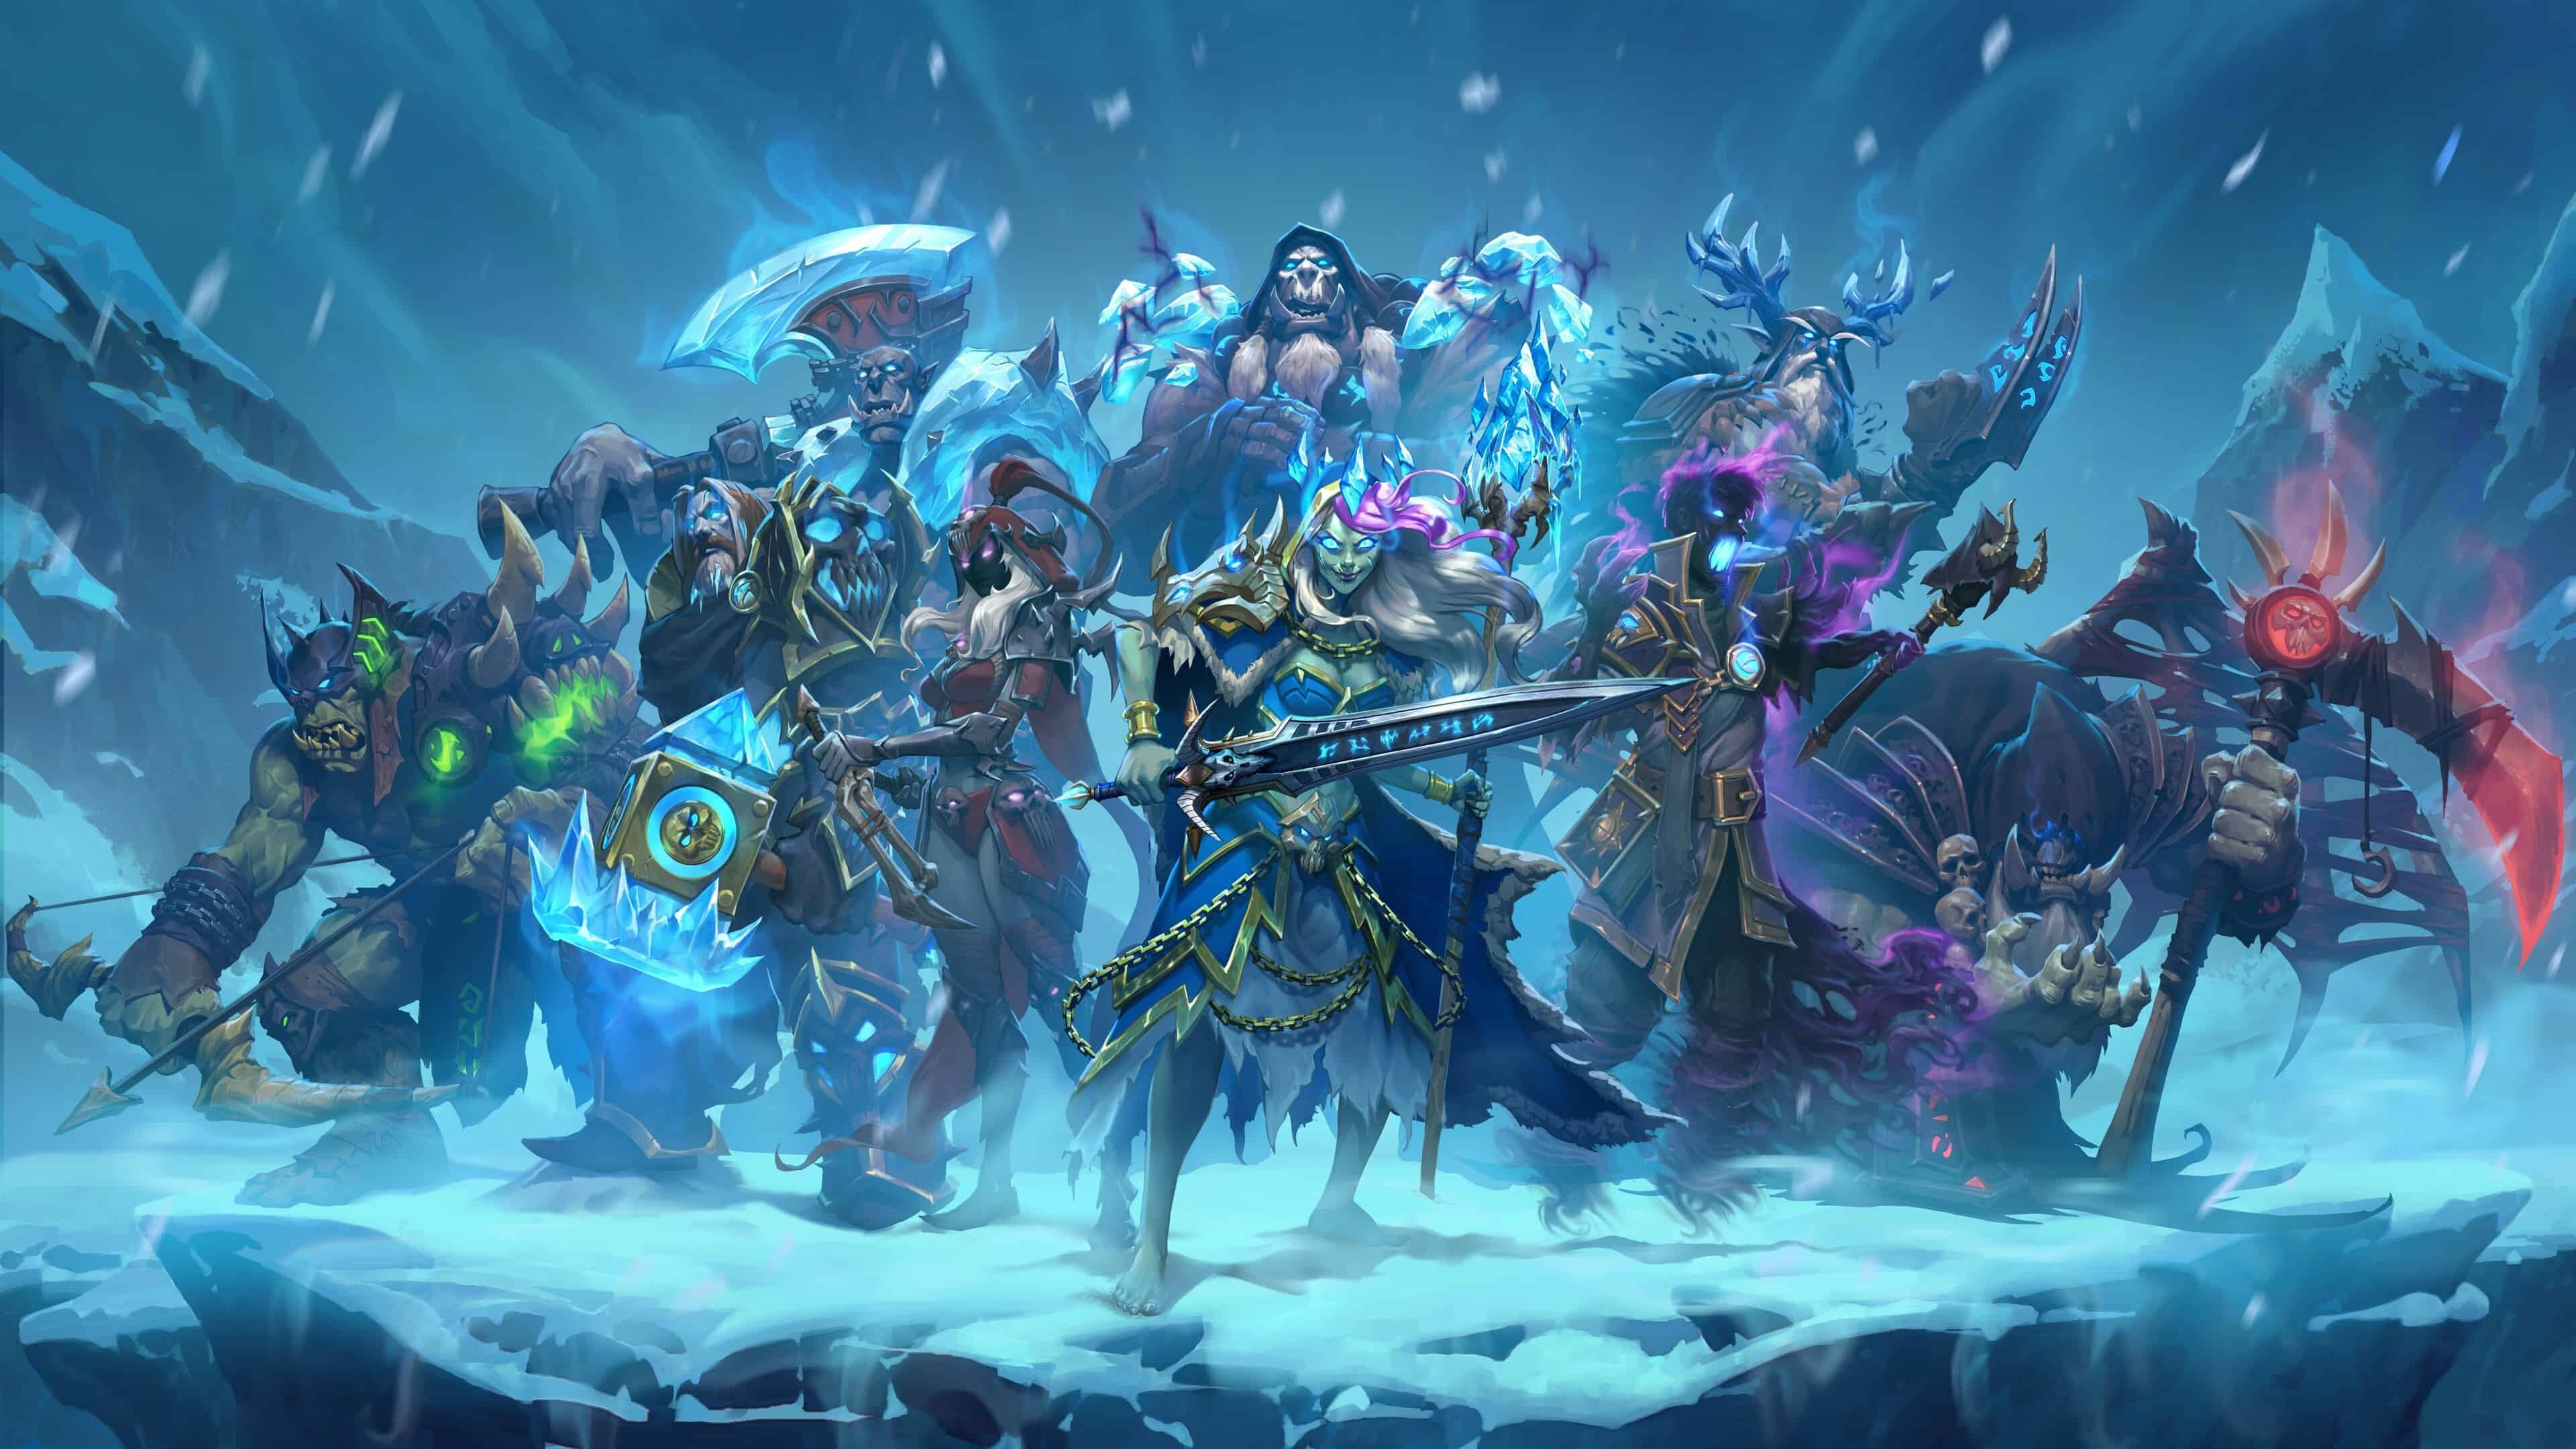 Hearthstone: One of the most-watched digital card games on Twitch. 3840x2160 4K Wallpaper.